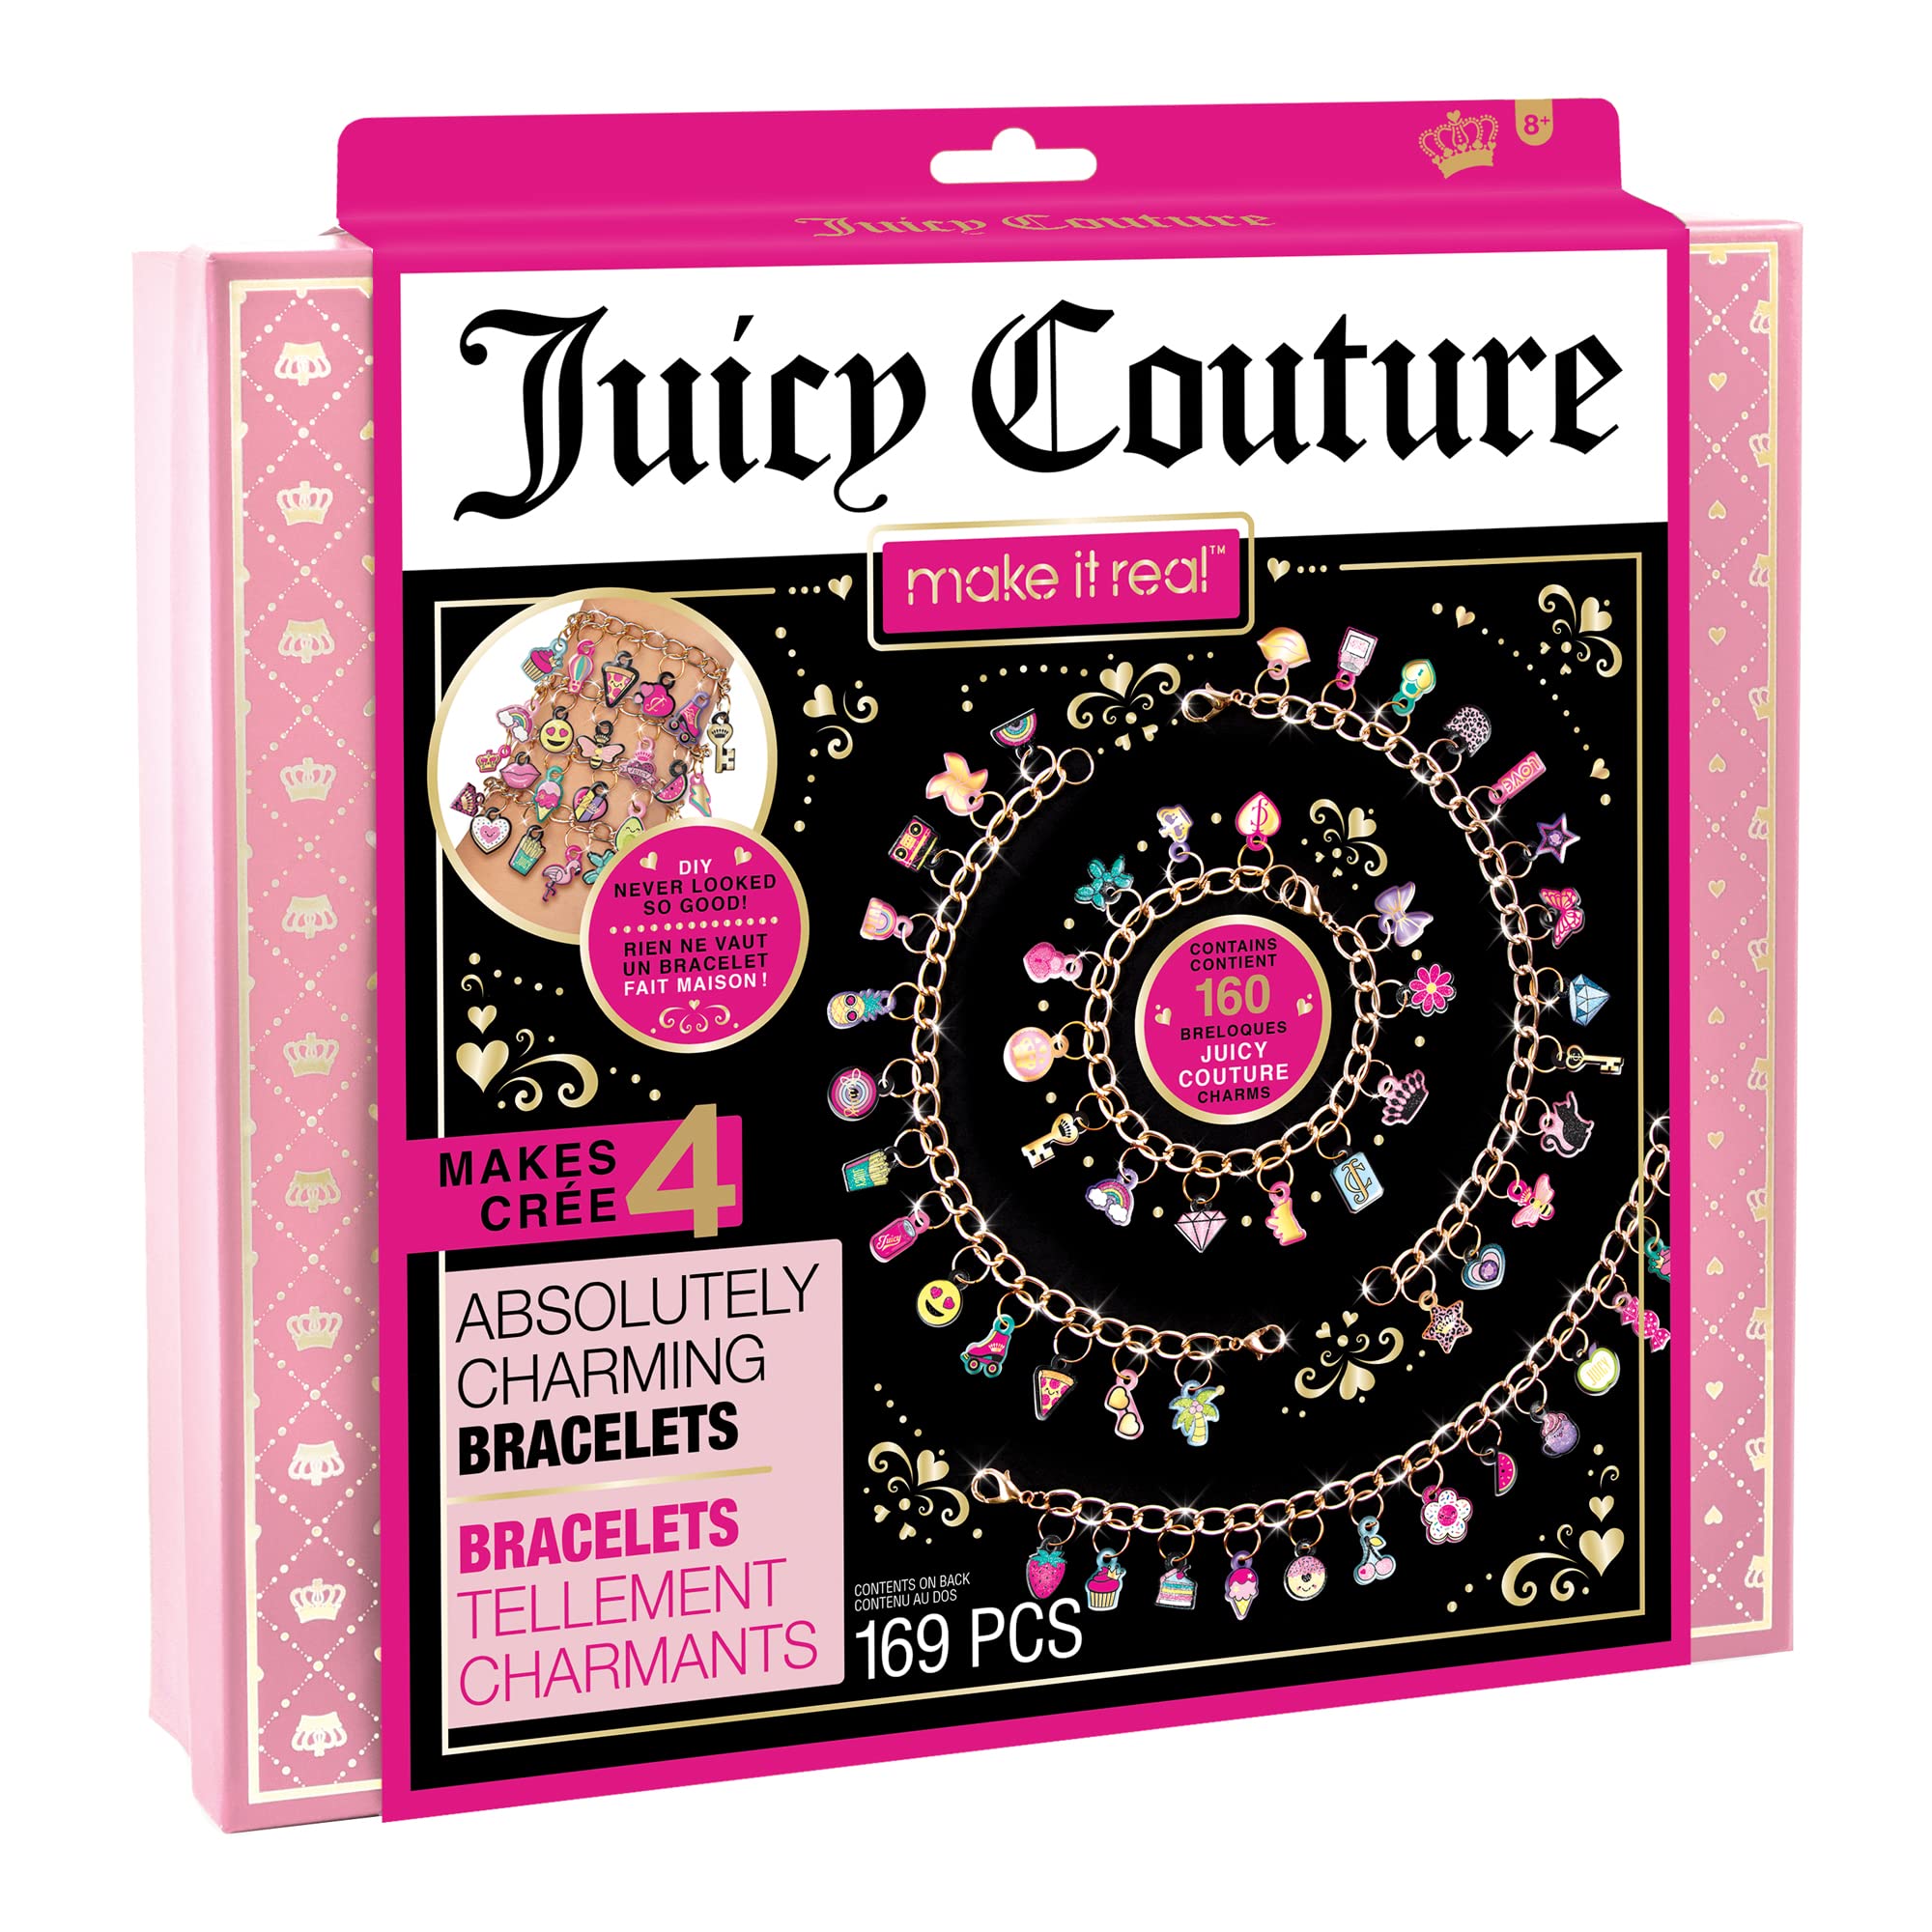 Make It Real - Juicy Couture Absolutely Charming Bracelet Making Kit - Kids Jewelry Making Kit - DIY Charm Bracelet Making Kit for Girls - Friendship Bracelets with Charms for Girls 8-10-12-14